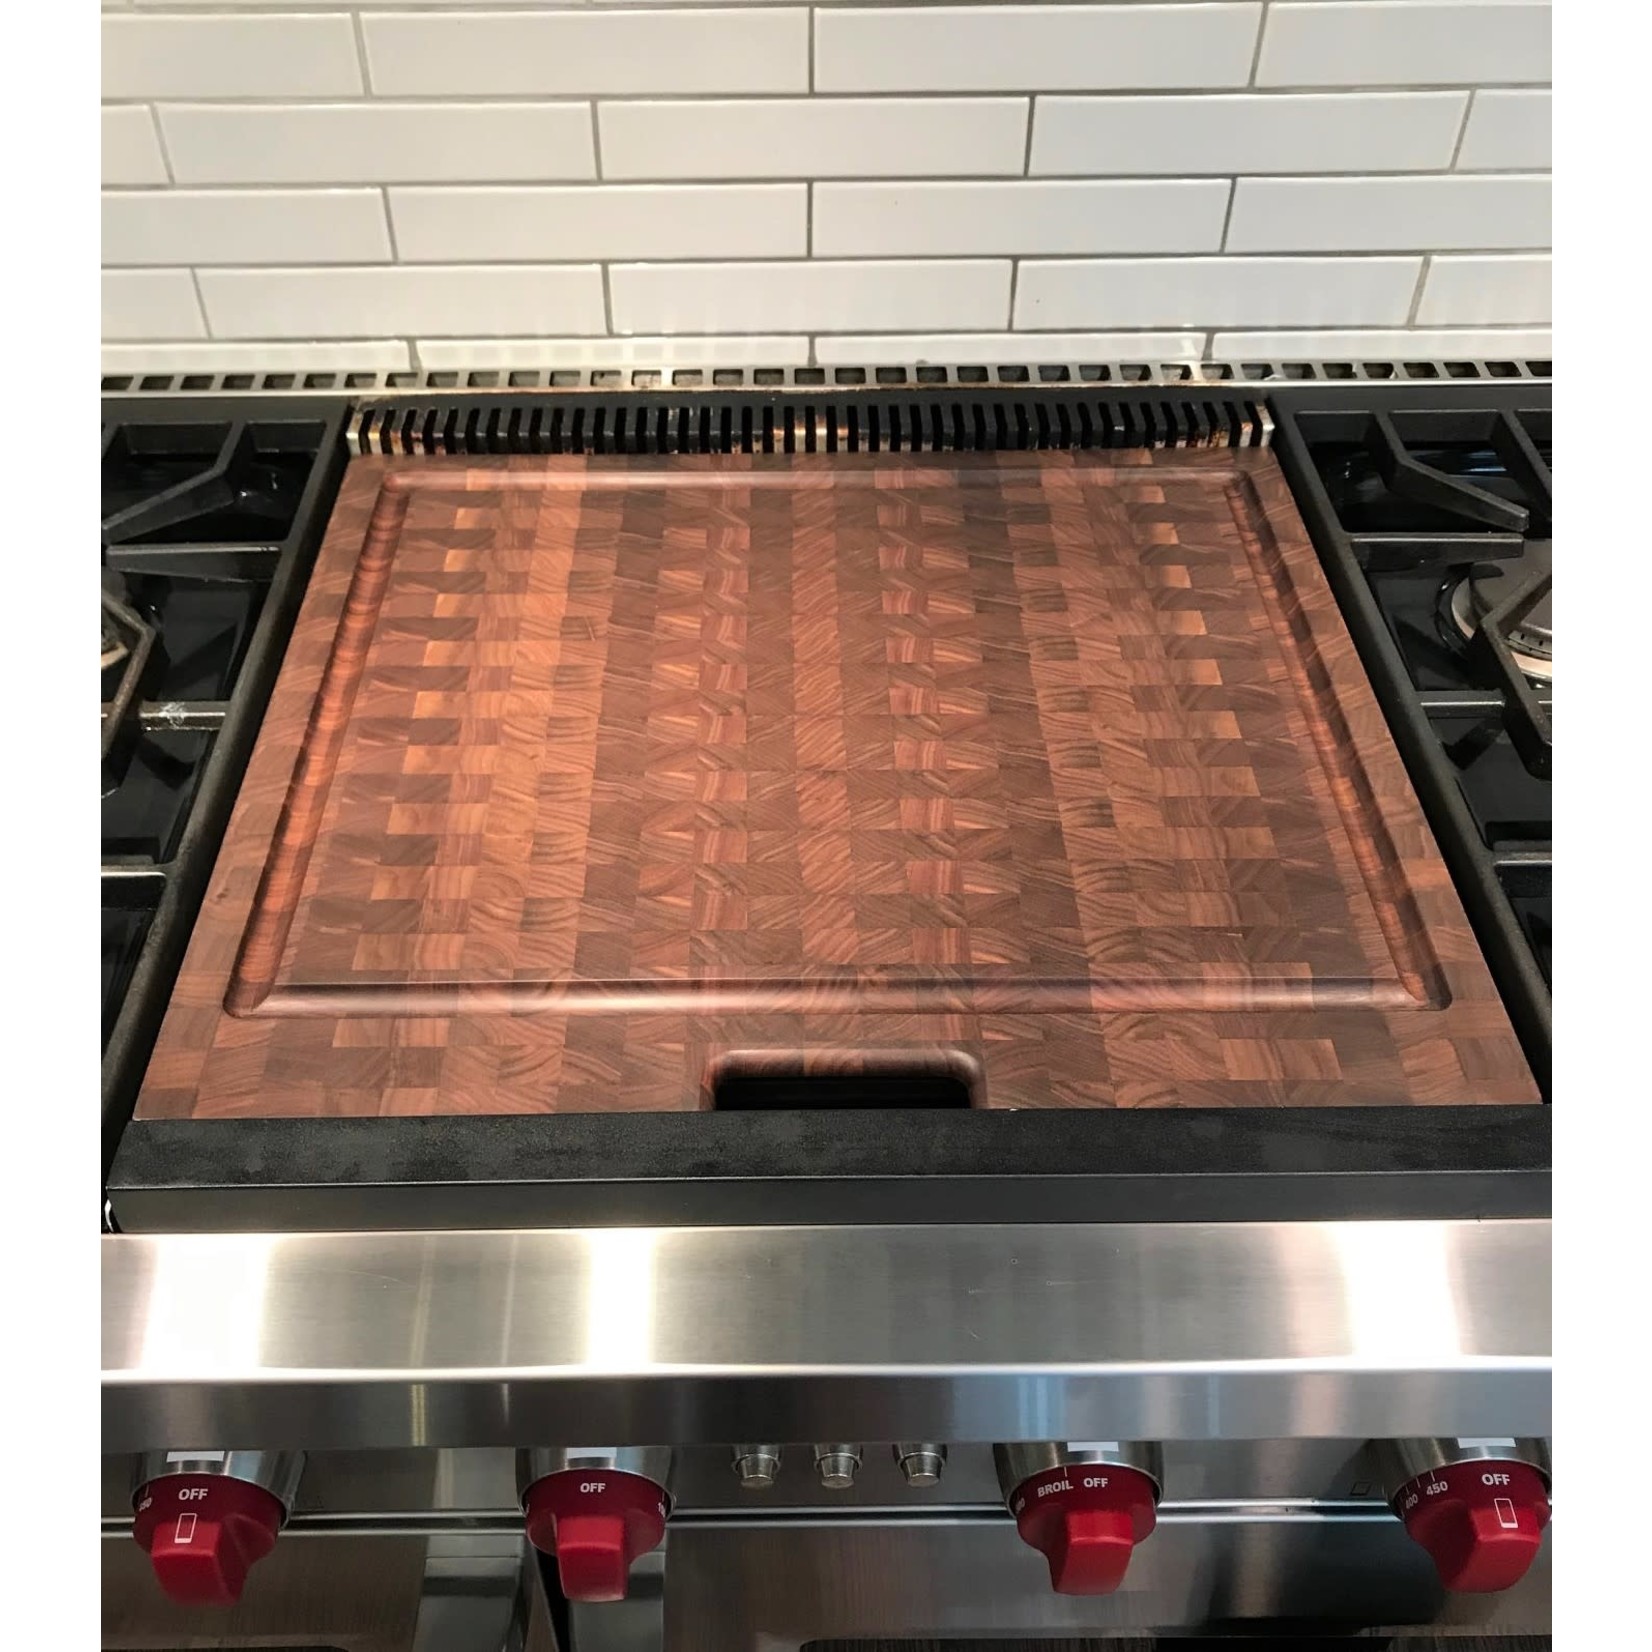 https://cdn.shoplightspeed.com/shops/612613/files/27262033/1652x1652x2/juice-groove-for-stove-top-cover-griddle.jpg